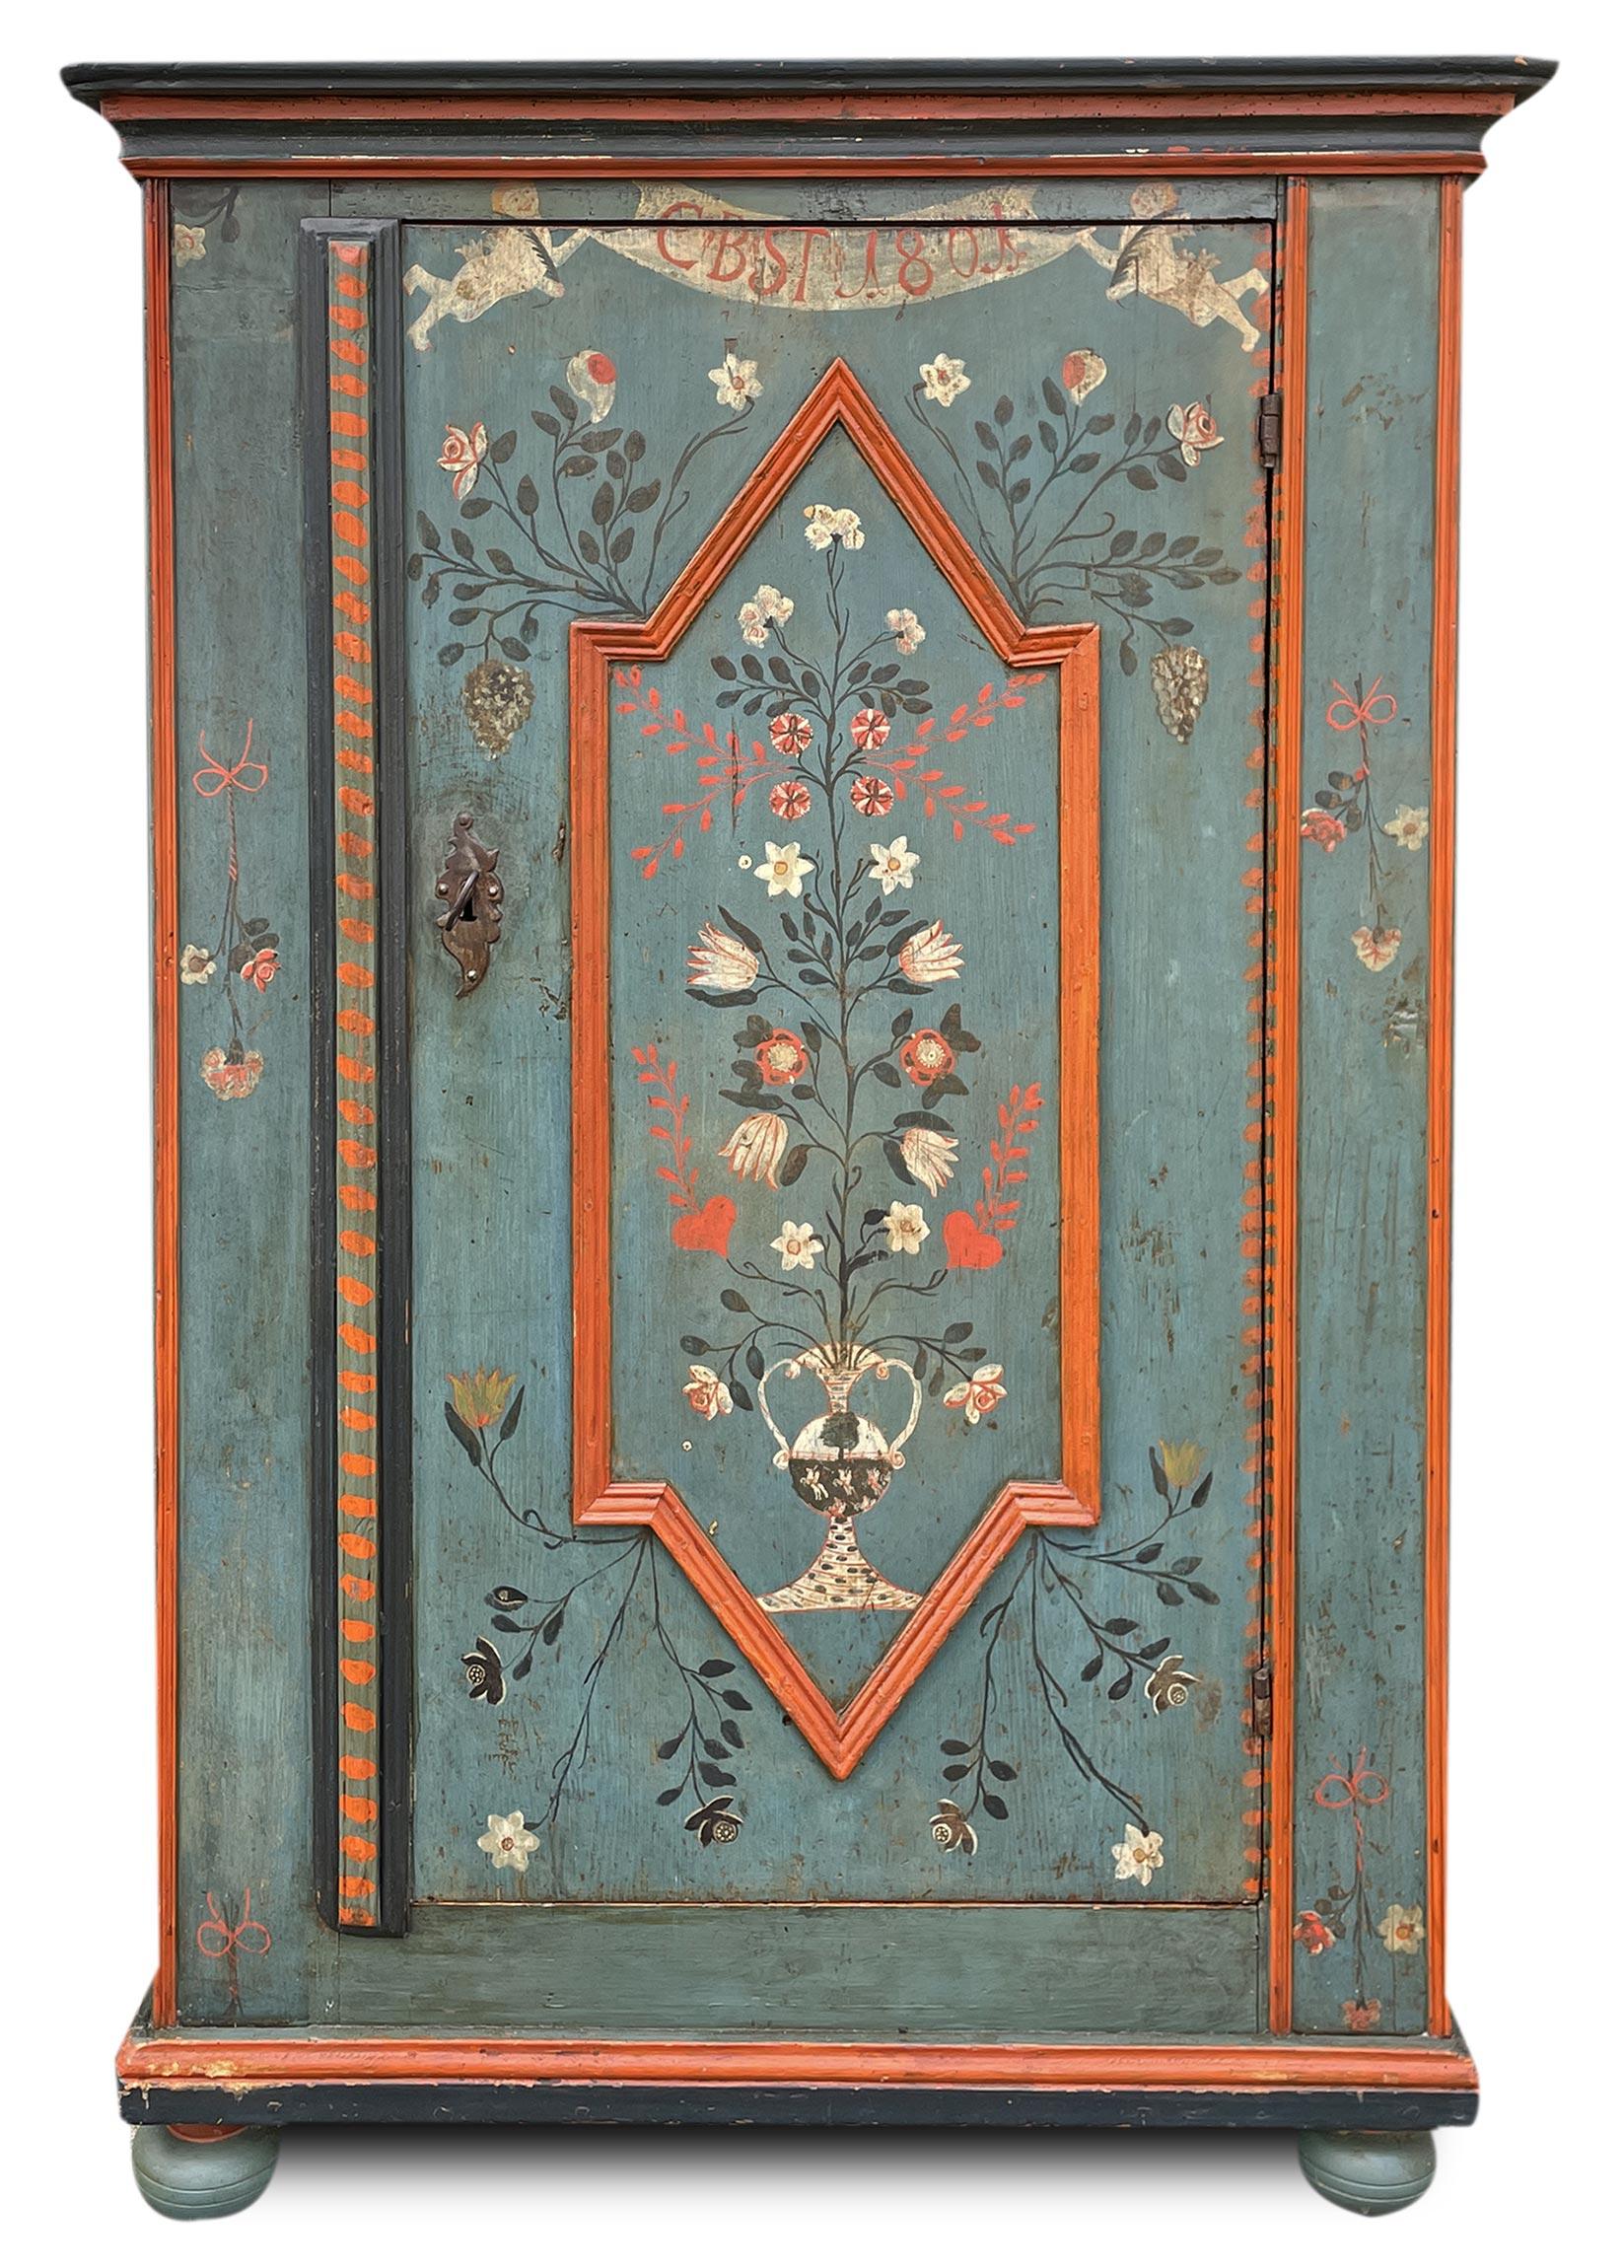 Blue Stipo wardrobe dated 1801

Measurements: H. 147 cm - L. 92 cm (102 cm at the frames)  - D. 38 cm (44 cm at the frames)
Essence: Fir
Period: 1801
Origin: Tyrol

Description:
Tyrolean Stipo wardrobe, with one door, entirely painted in teal